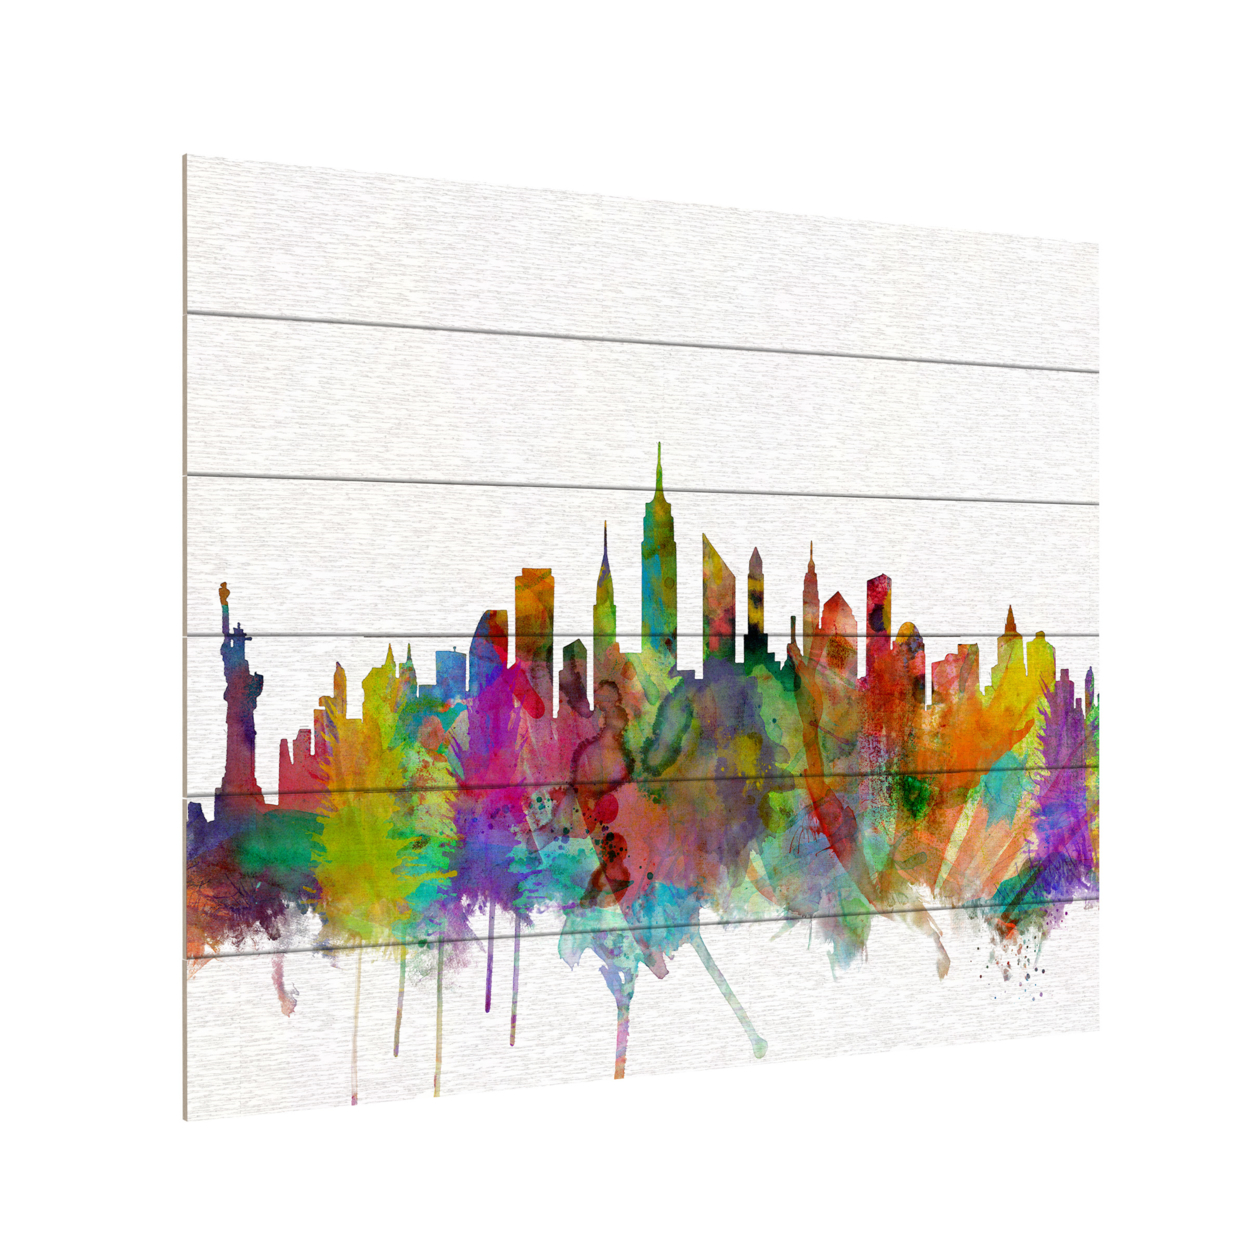 Wooden Slat Art 18 X 22 Inches Titled New York City Skyline Ready To Hang Home Decor Picture